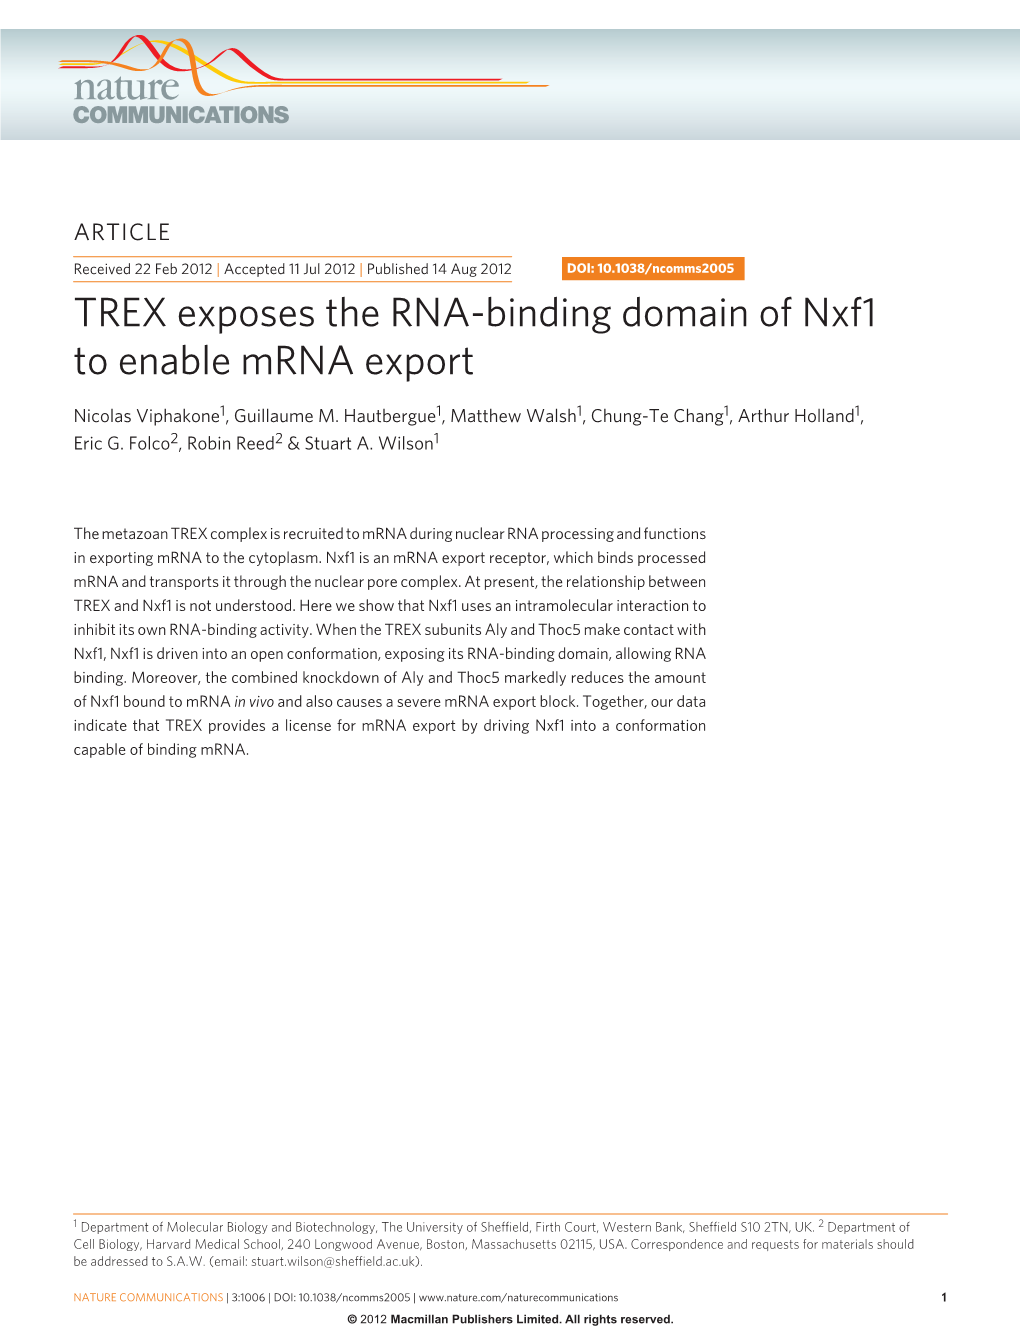 TREX Exposes the RNA-Binding Domain of Nxf1 to Enable Mrna Export